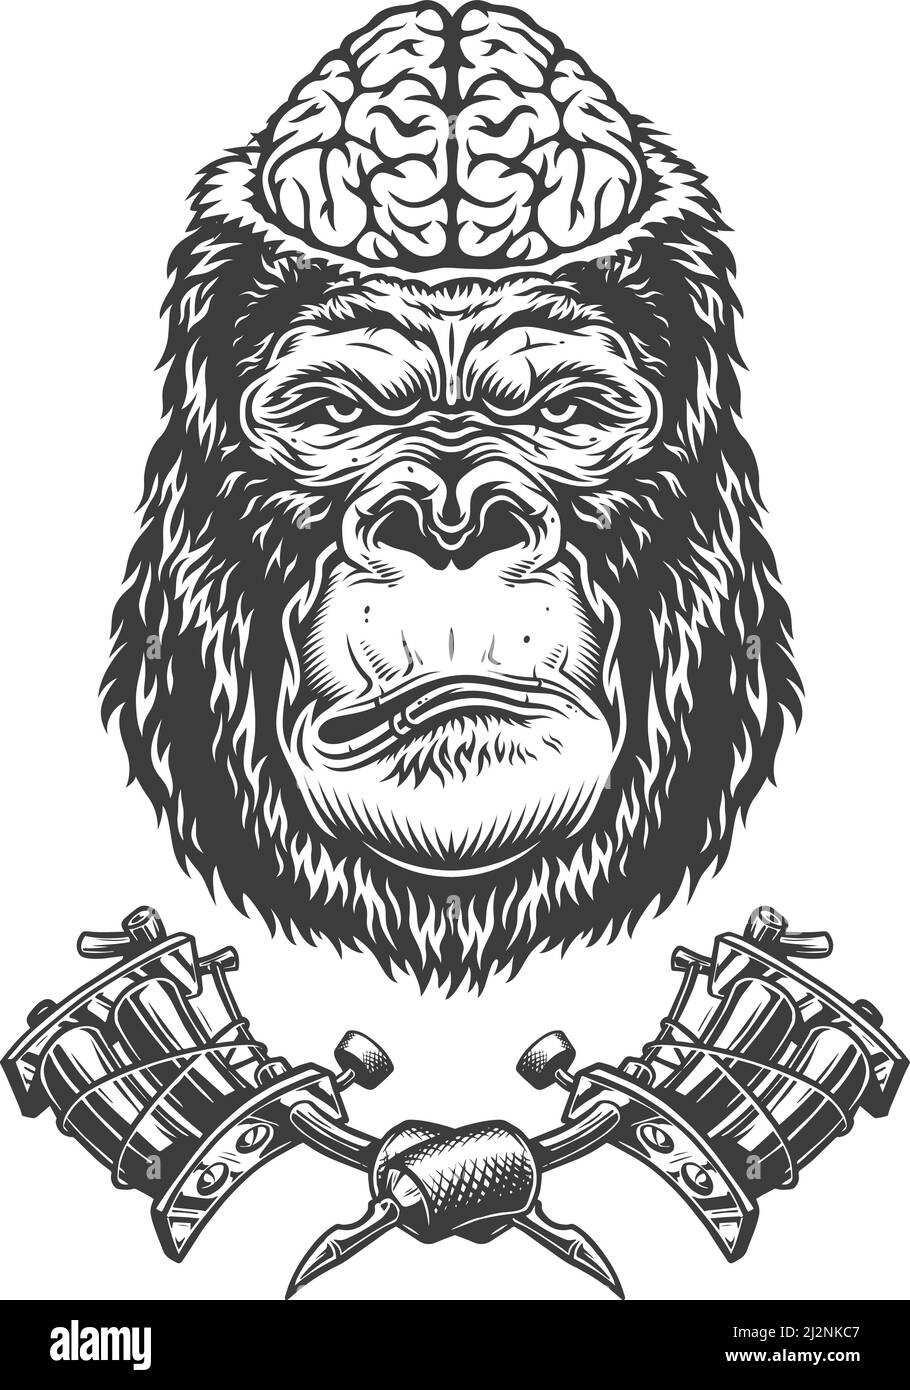 190 Magnificent Gorilla Tattoo Designs With Meanings 2023   TattoosBoyGirl